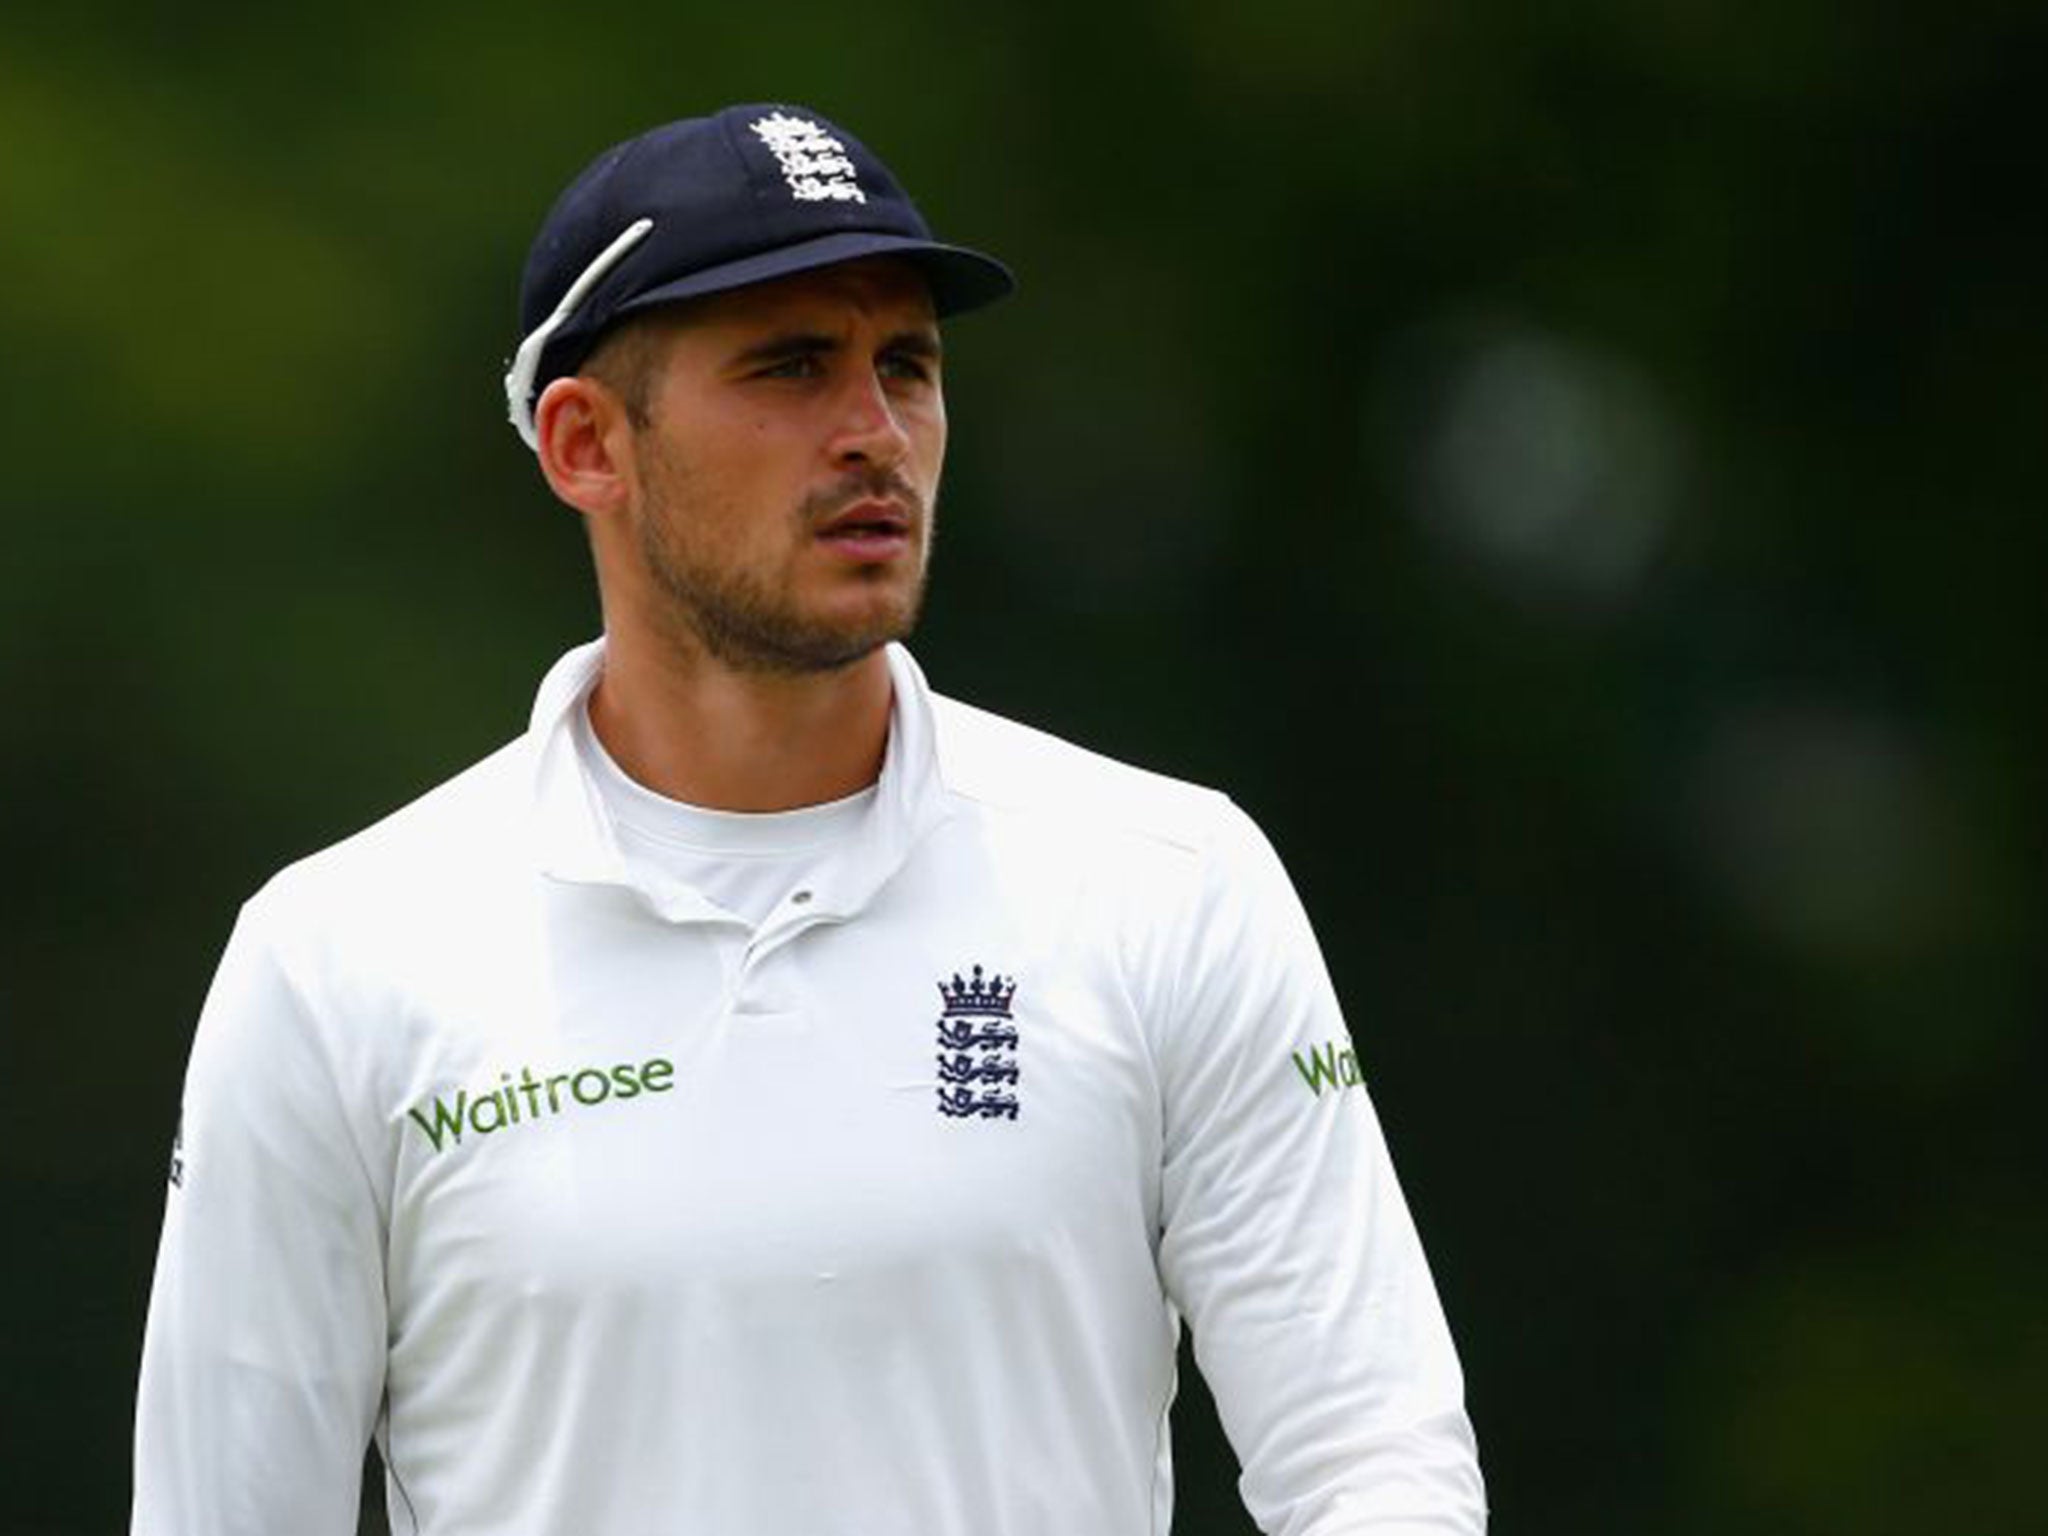 &#13;
Alex Hales remains Alastair Cook's opening partner &#13;